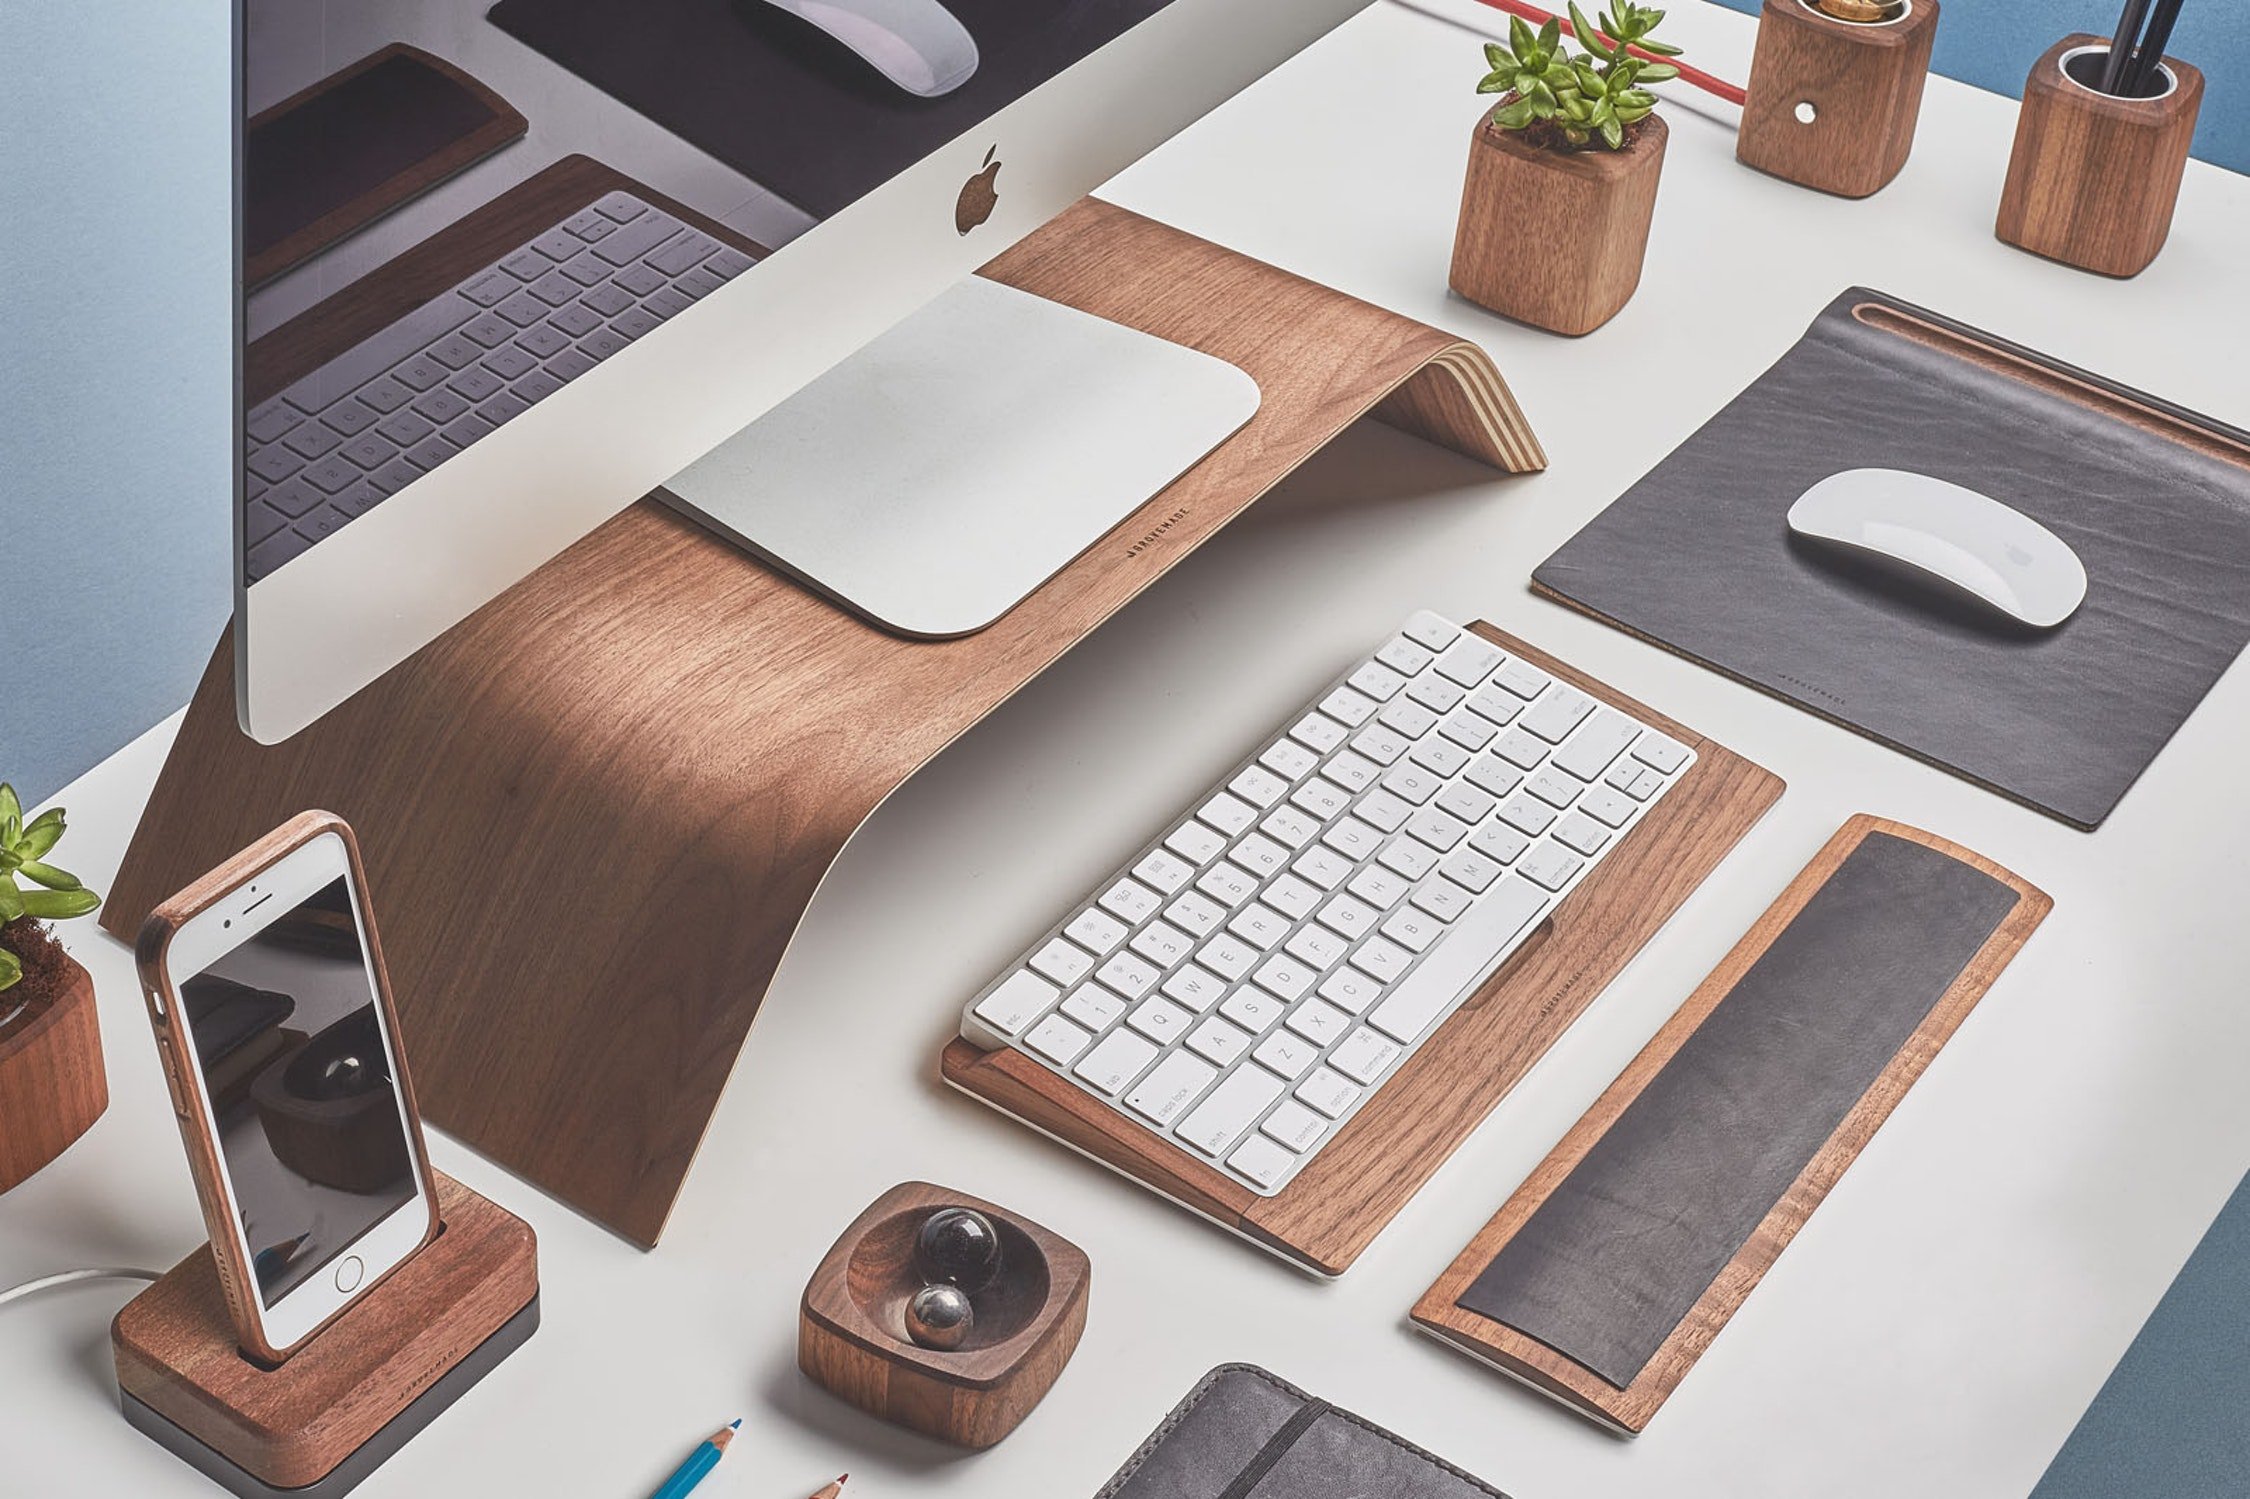 Opt for a walnut iMac stand and accessories from Grovemade.